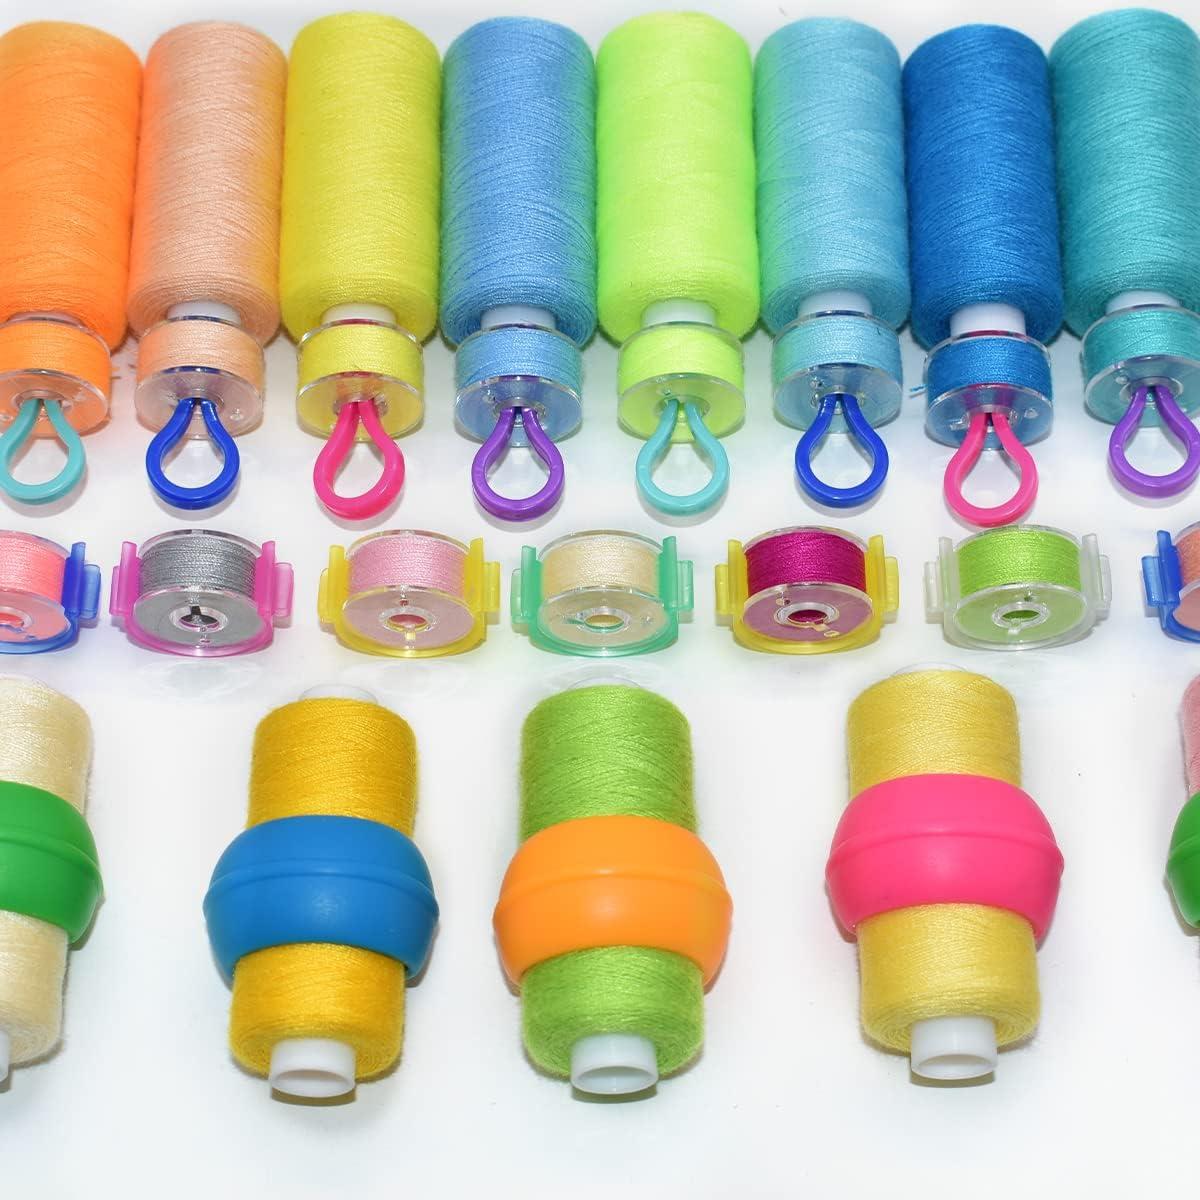 Sewing thread set with 10 Bobbin clips